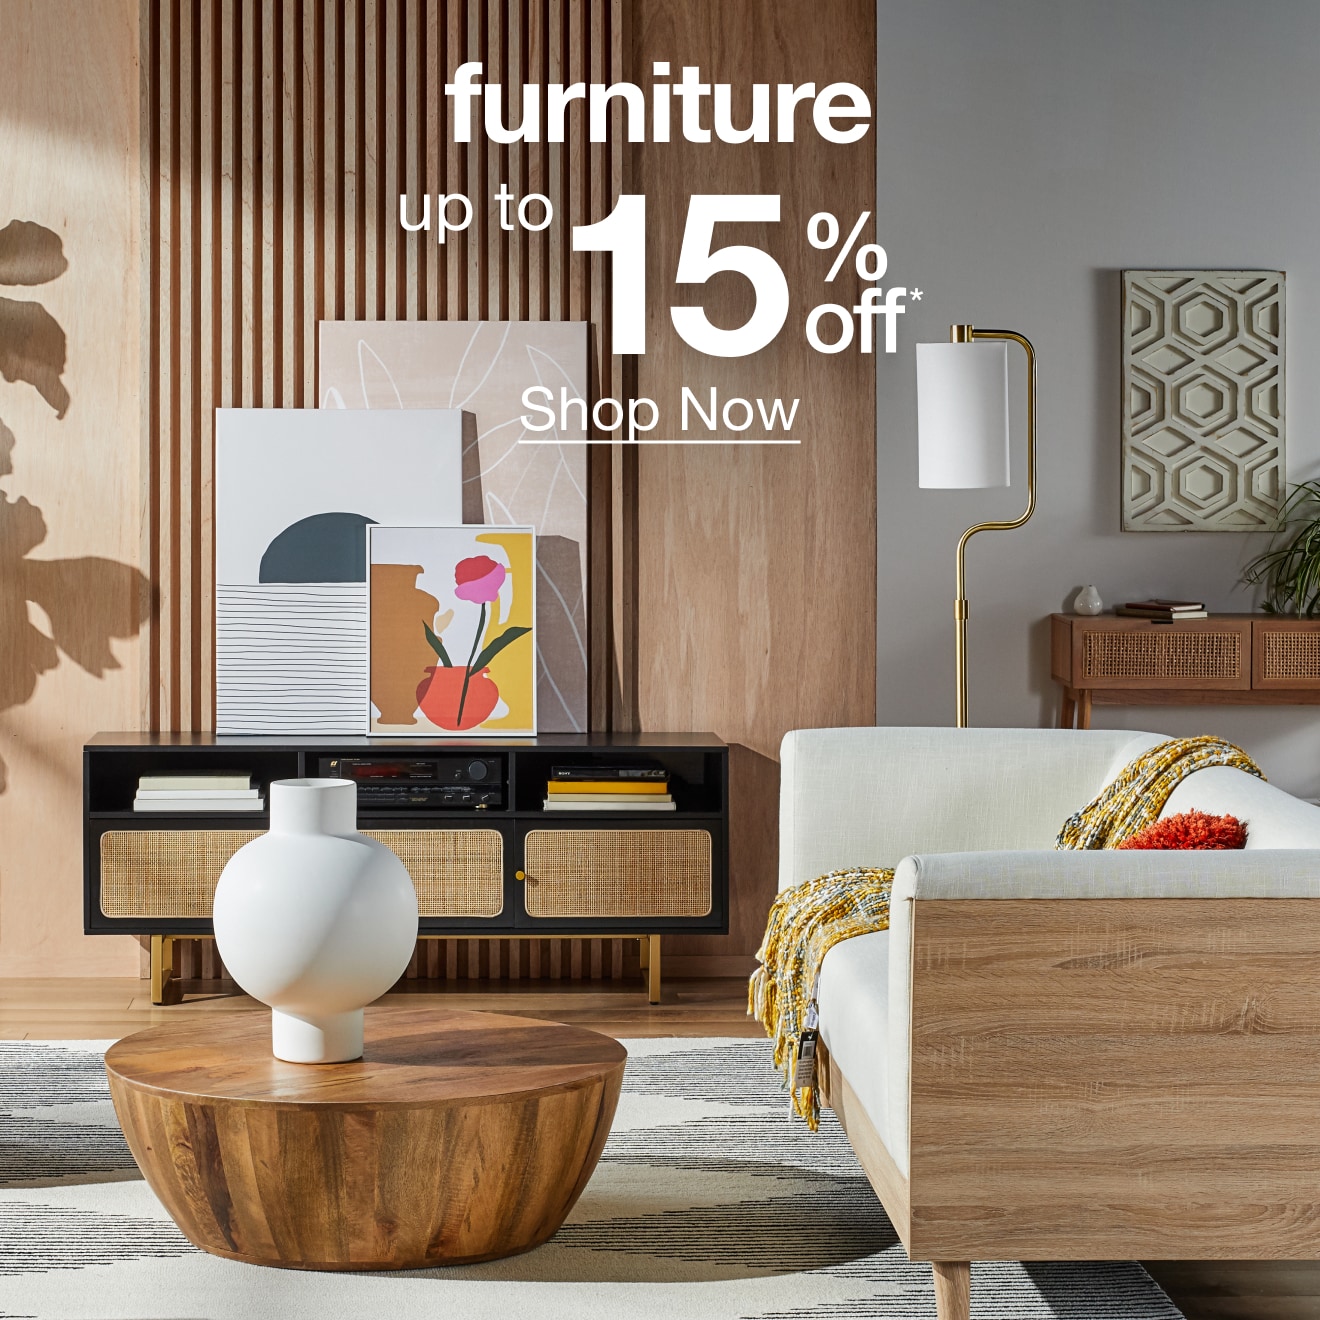 Furniture Up to 15% Off* — Shop Now!